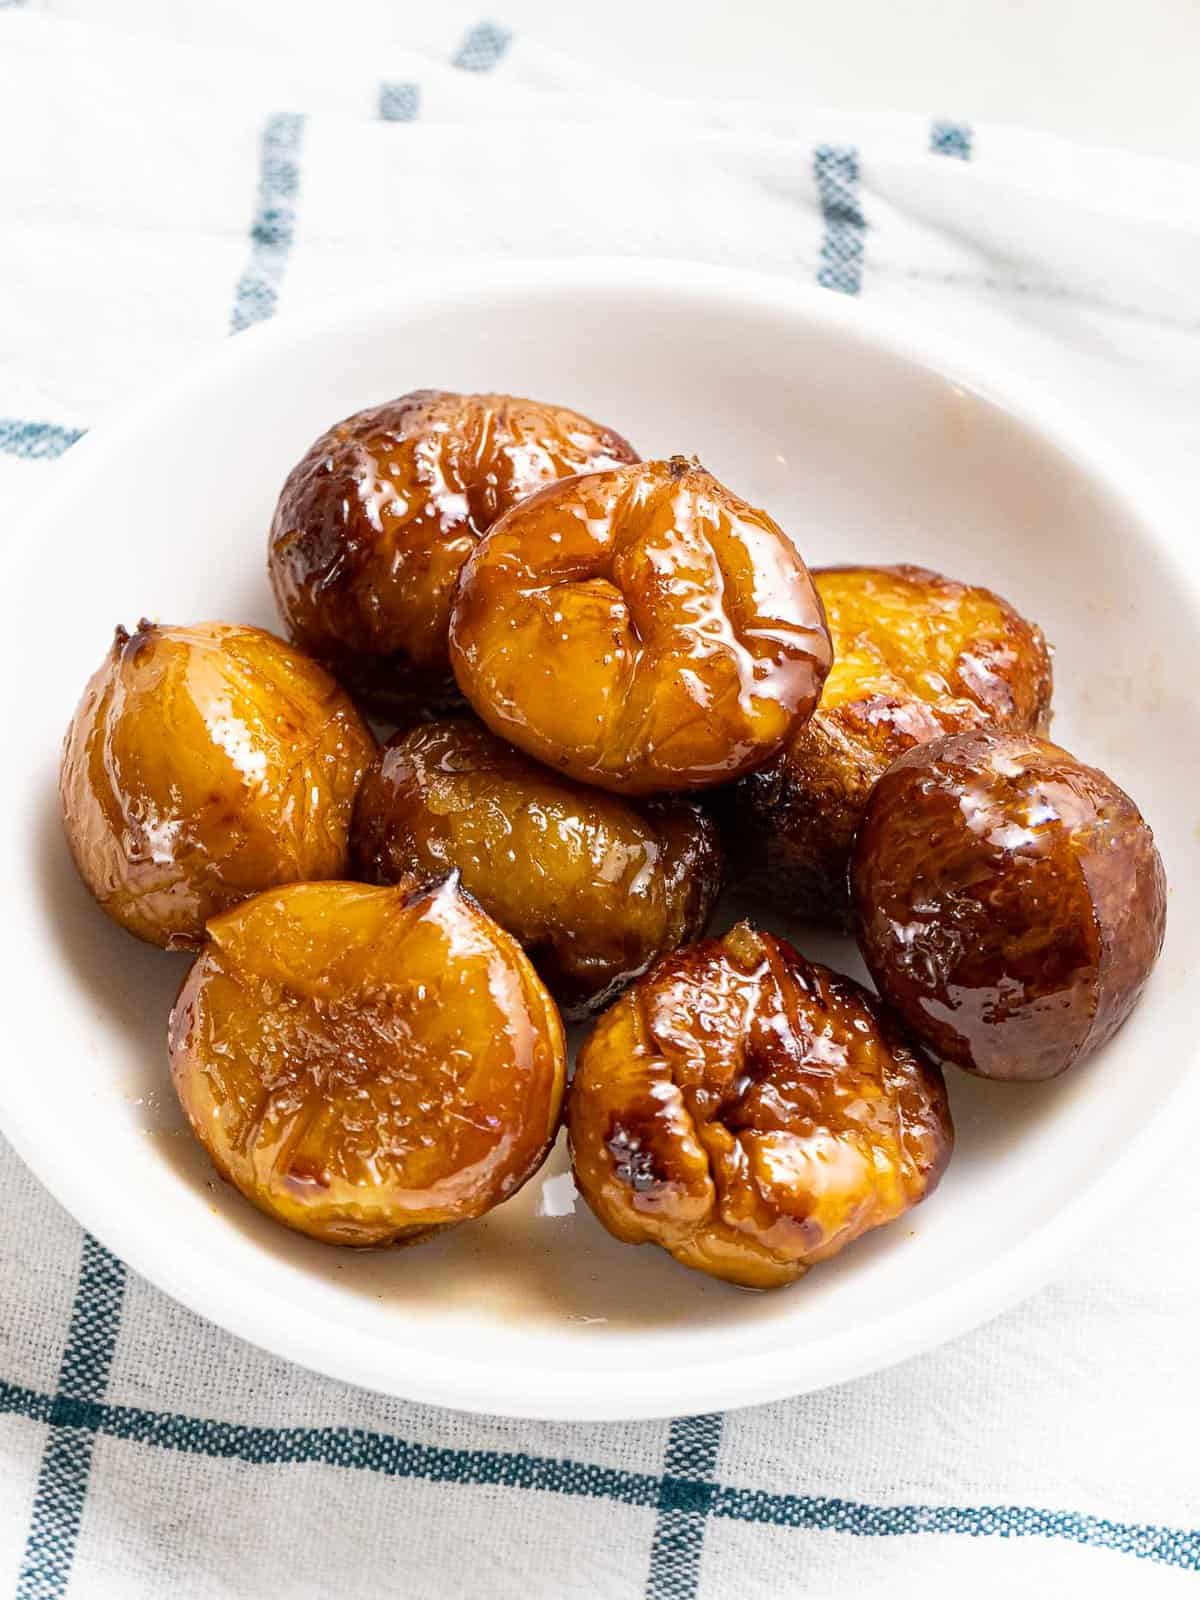 Quick candied chestnuts in spiced cinnamon sugar glaze in a white bowl.